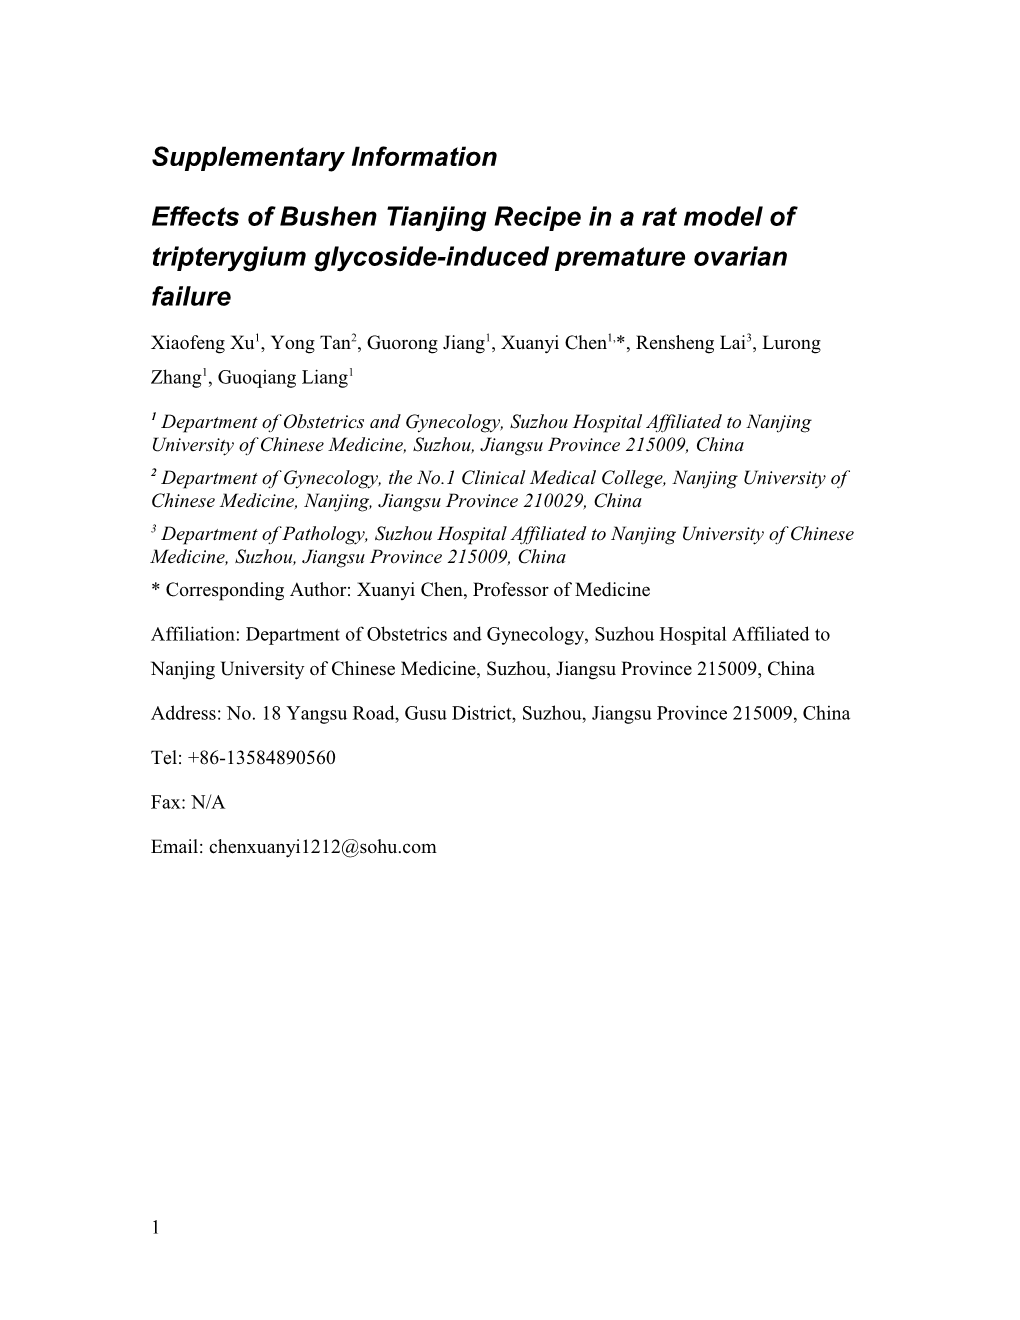 Therapeutic Effects of Bushen Tianjing Recipe on Tripterygium Glycosides Induced Rat Model